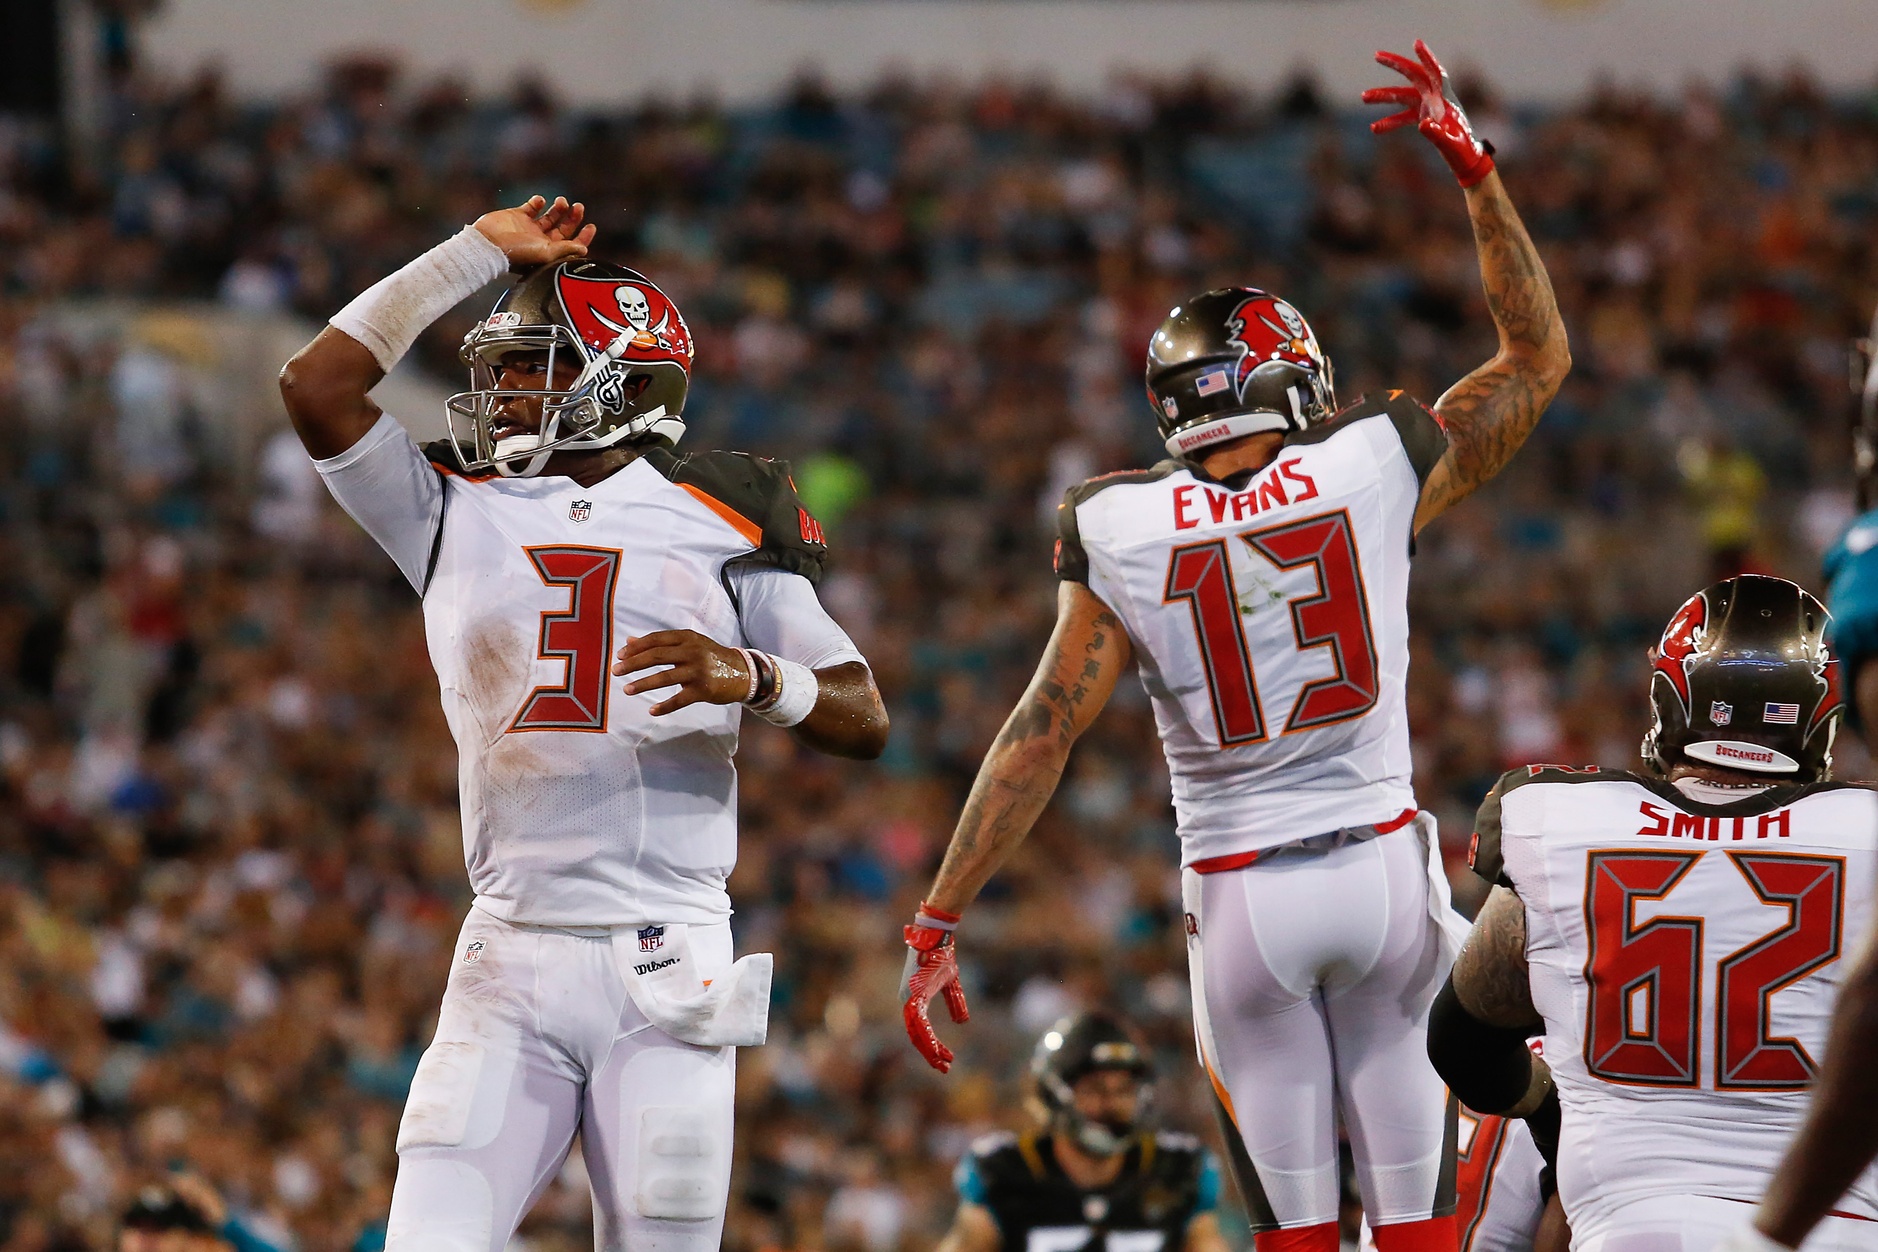 Jameis Winston and Mike Evans should dominate the NFC South in 2017.